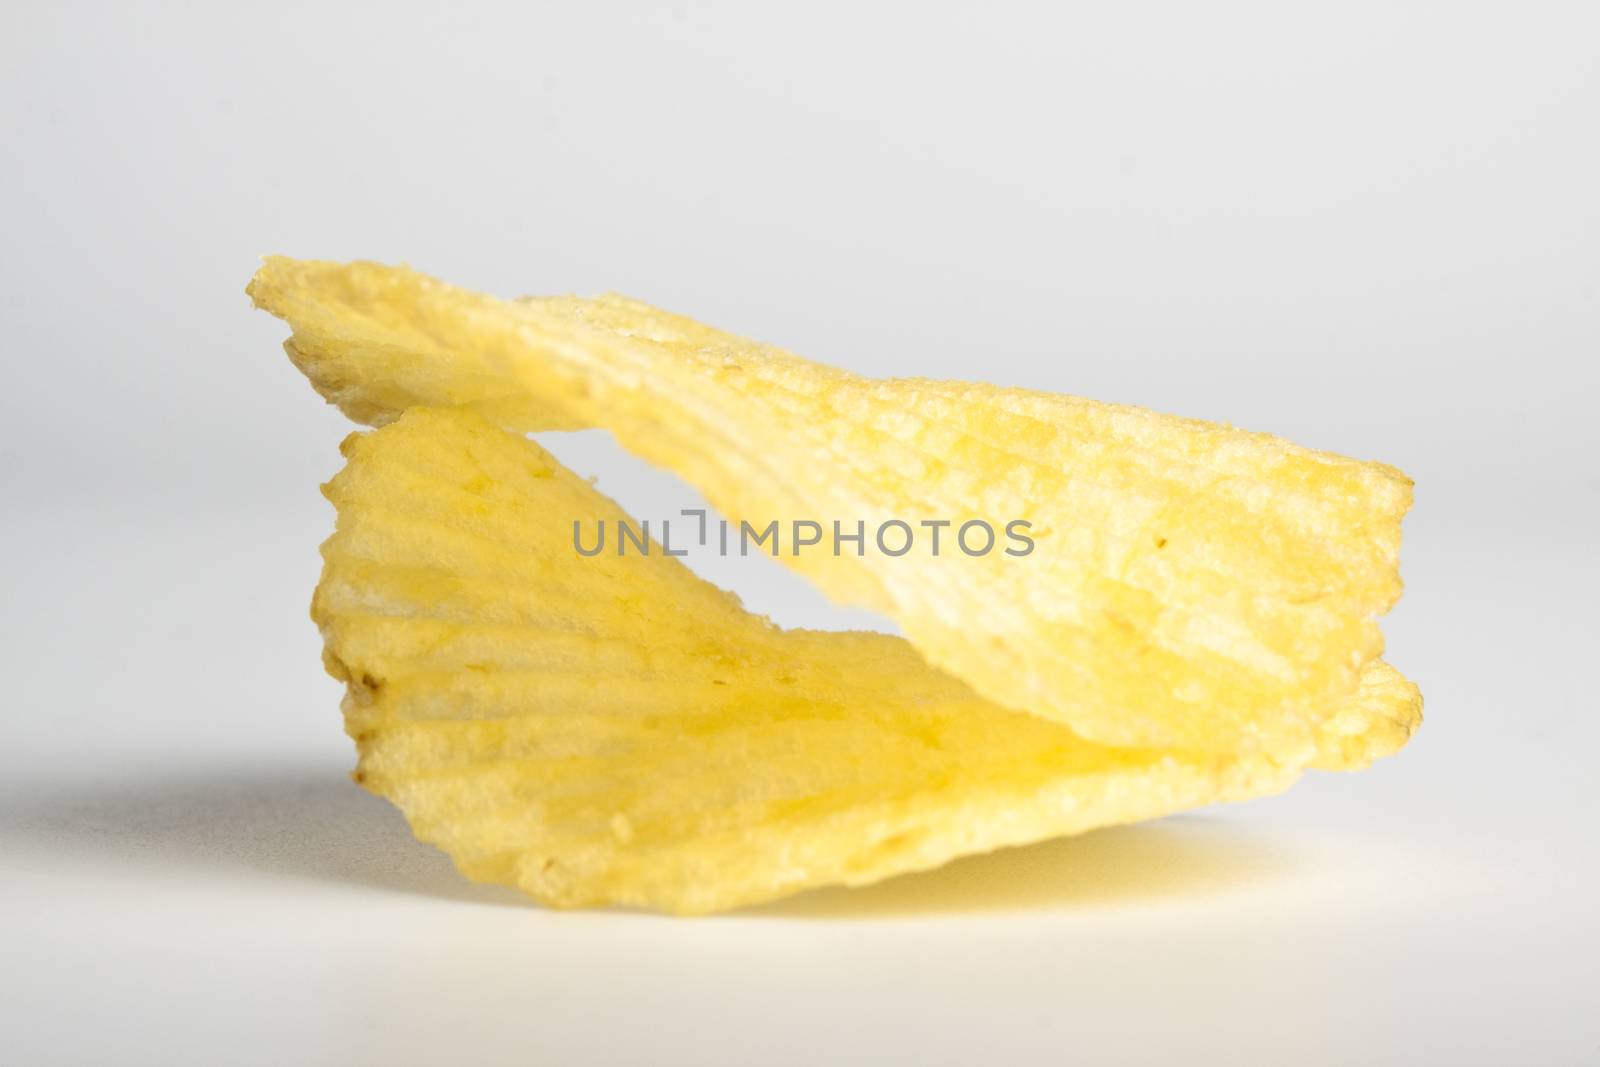 two chips sncaks on white background with shadow